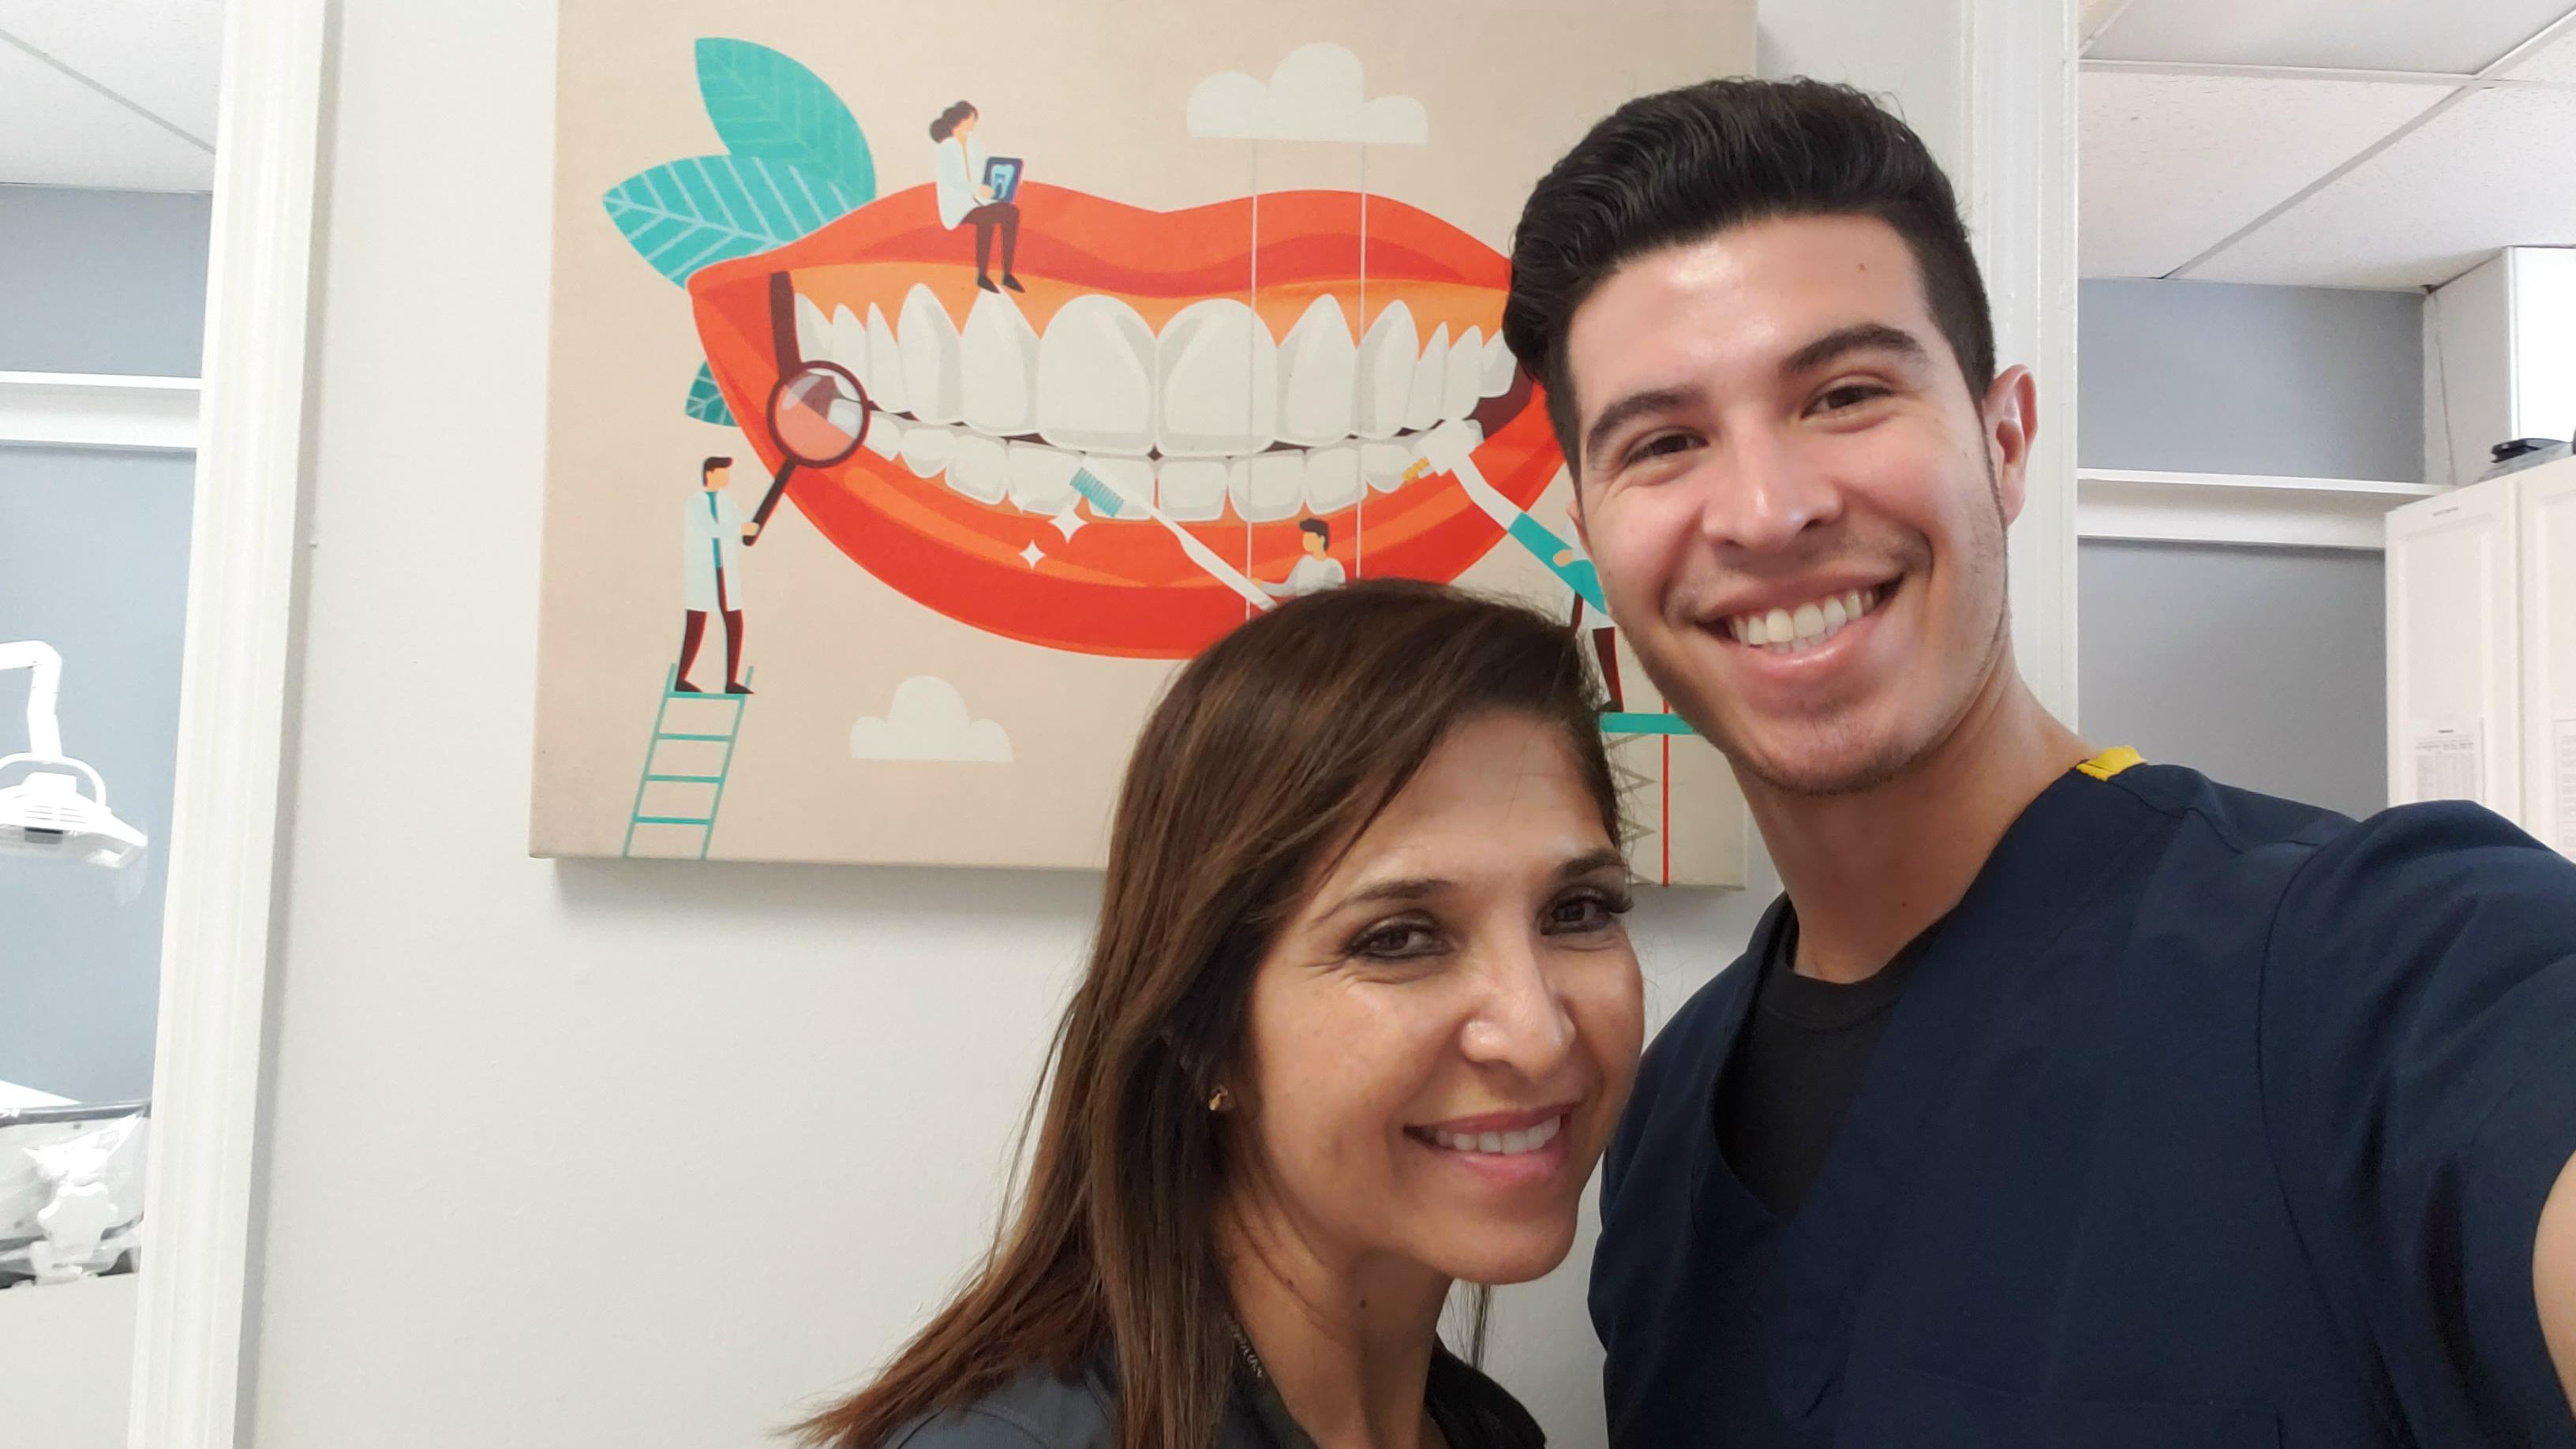 Boca Raton Traveling Dentist offering in home dentistry for patients who don't want to leave their house or assisted living center. Services include: Dentures, denture repairs, tooth extractions, non-invasive cavity treatments, tooth x-rays, checkups, oral exams, second opinions, and more - contact us to speak to the Boca Raton Dentists!